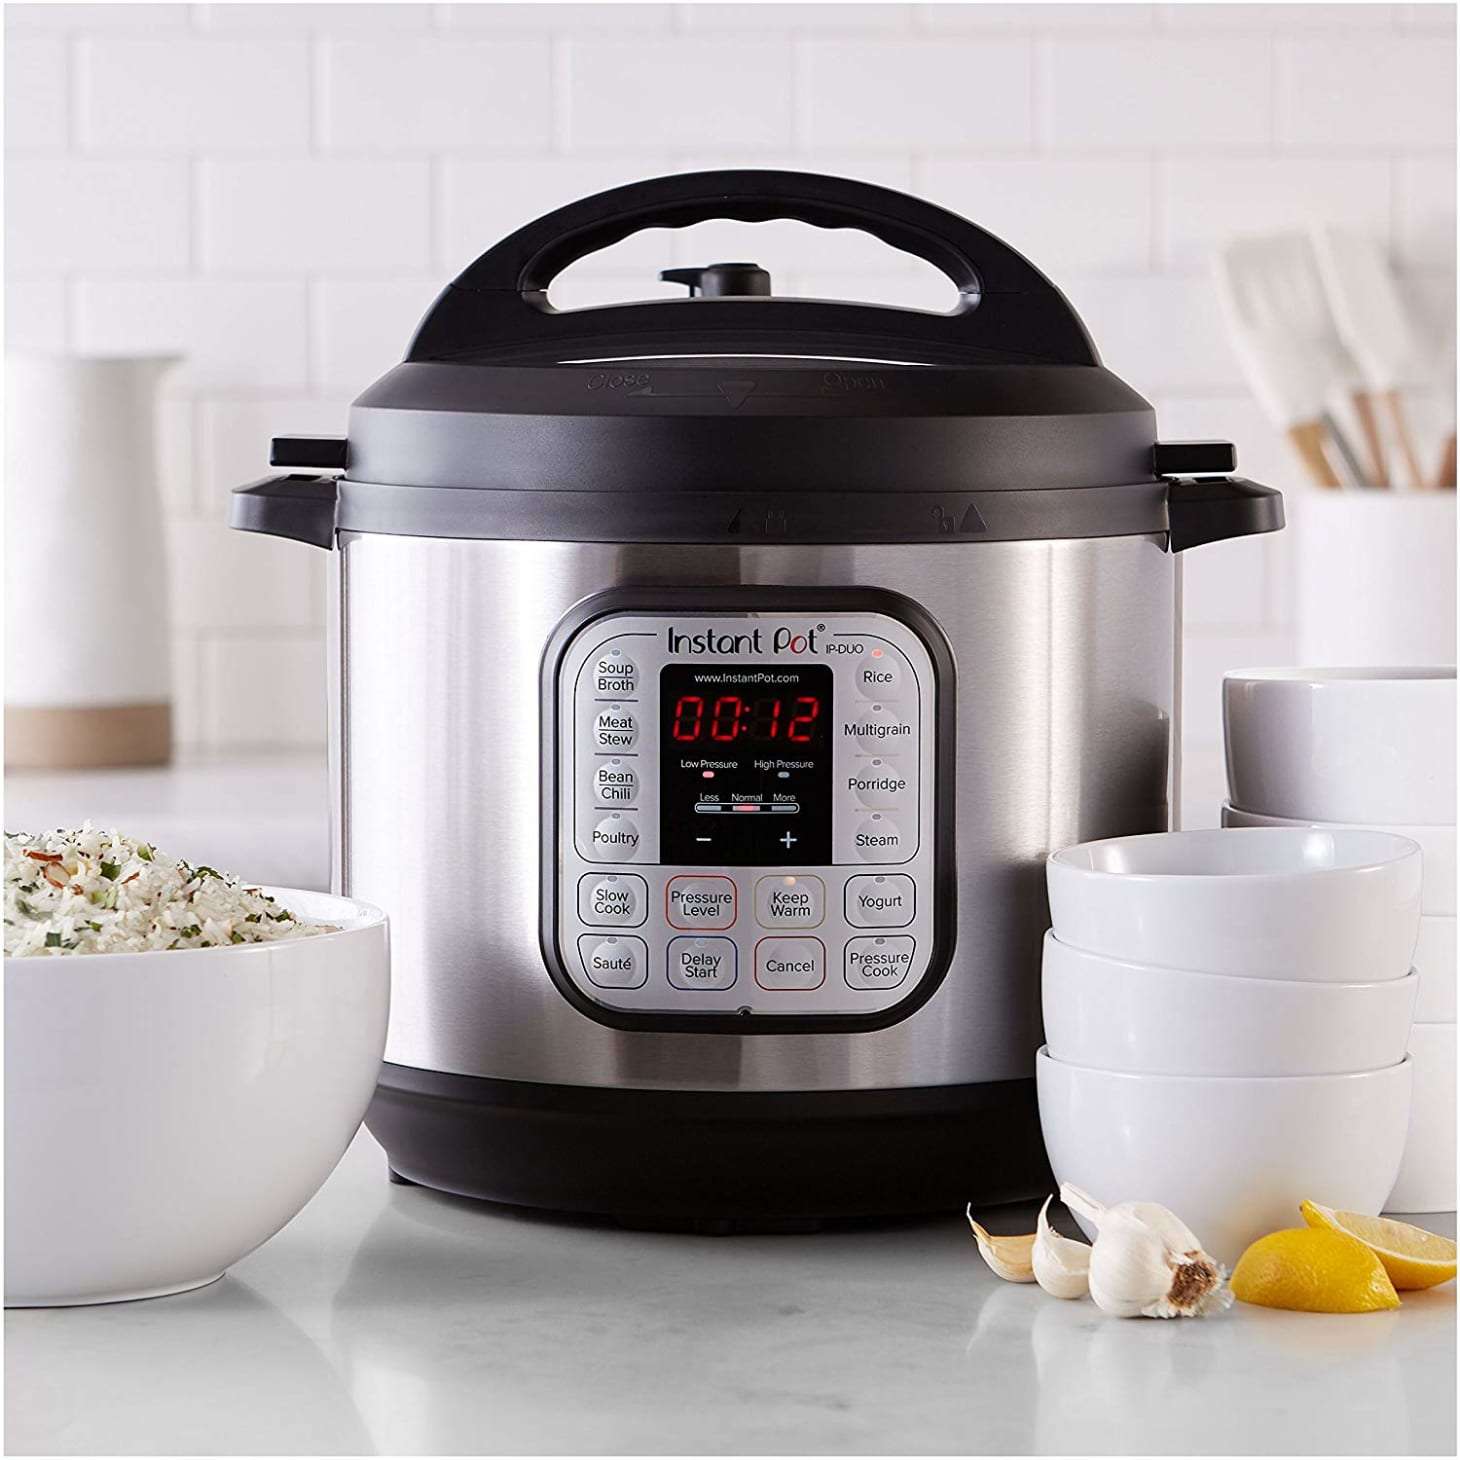 Amazon Black Friday Instant Pot 8 Quart Deal Of The Day ...